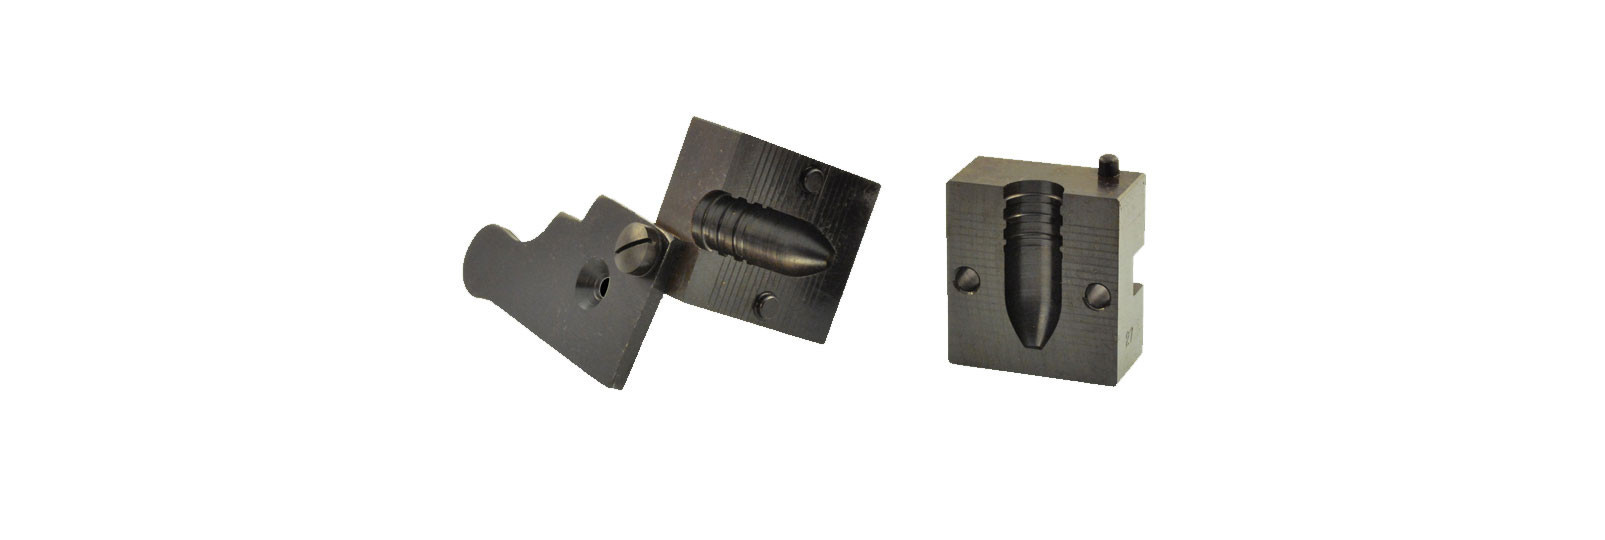 Bullet mould block with 1 cavity - conical bullet